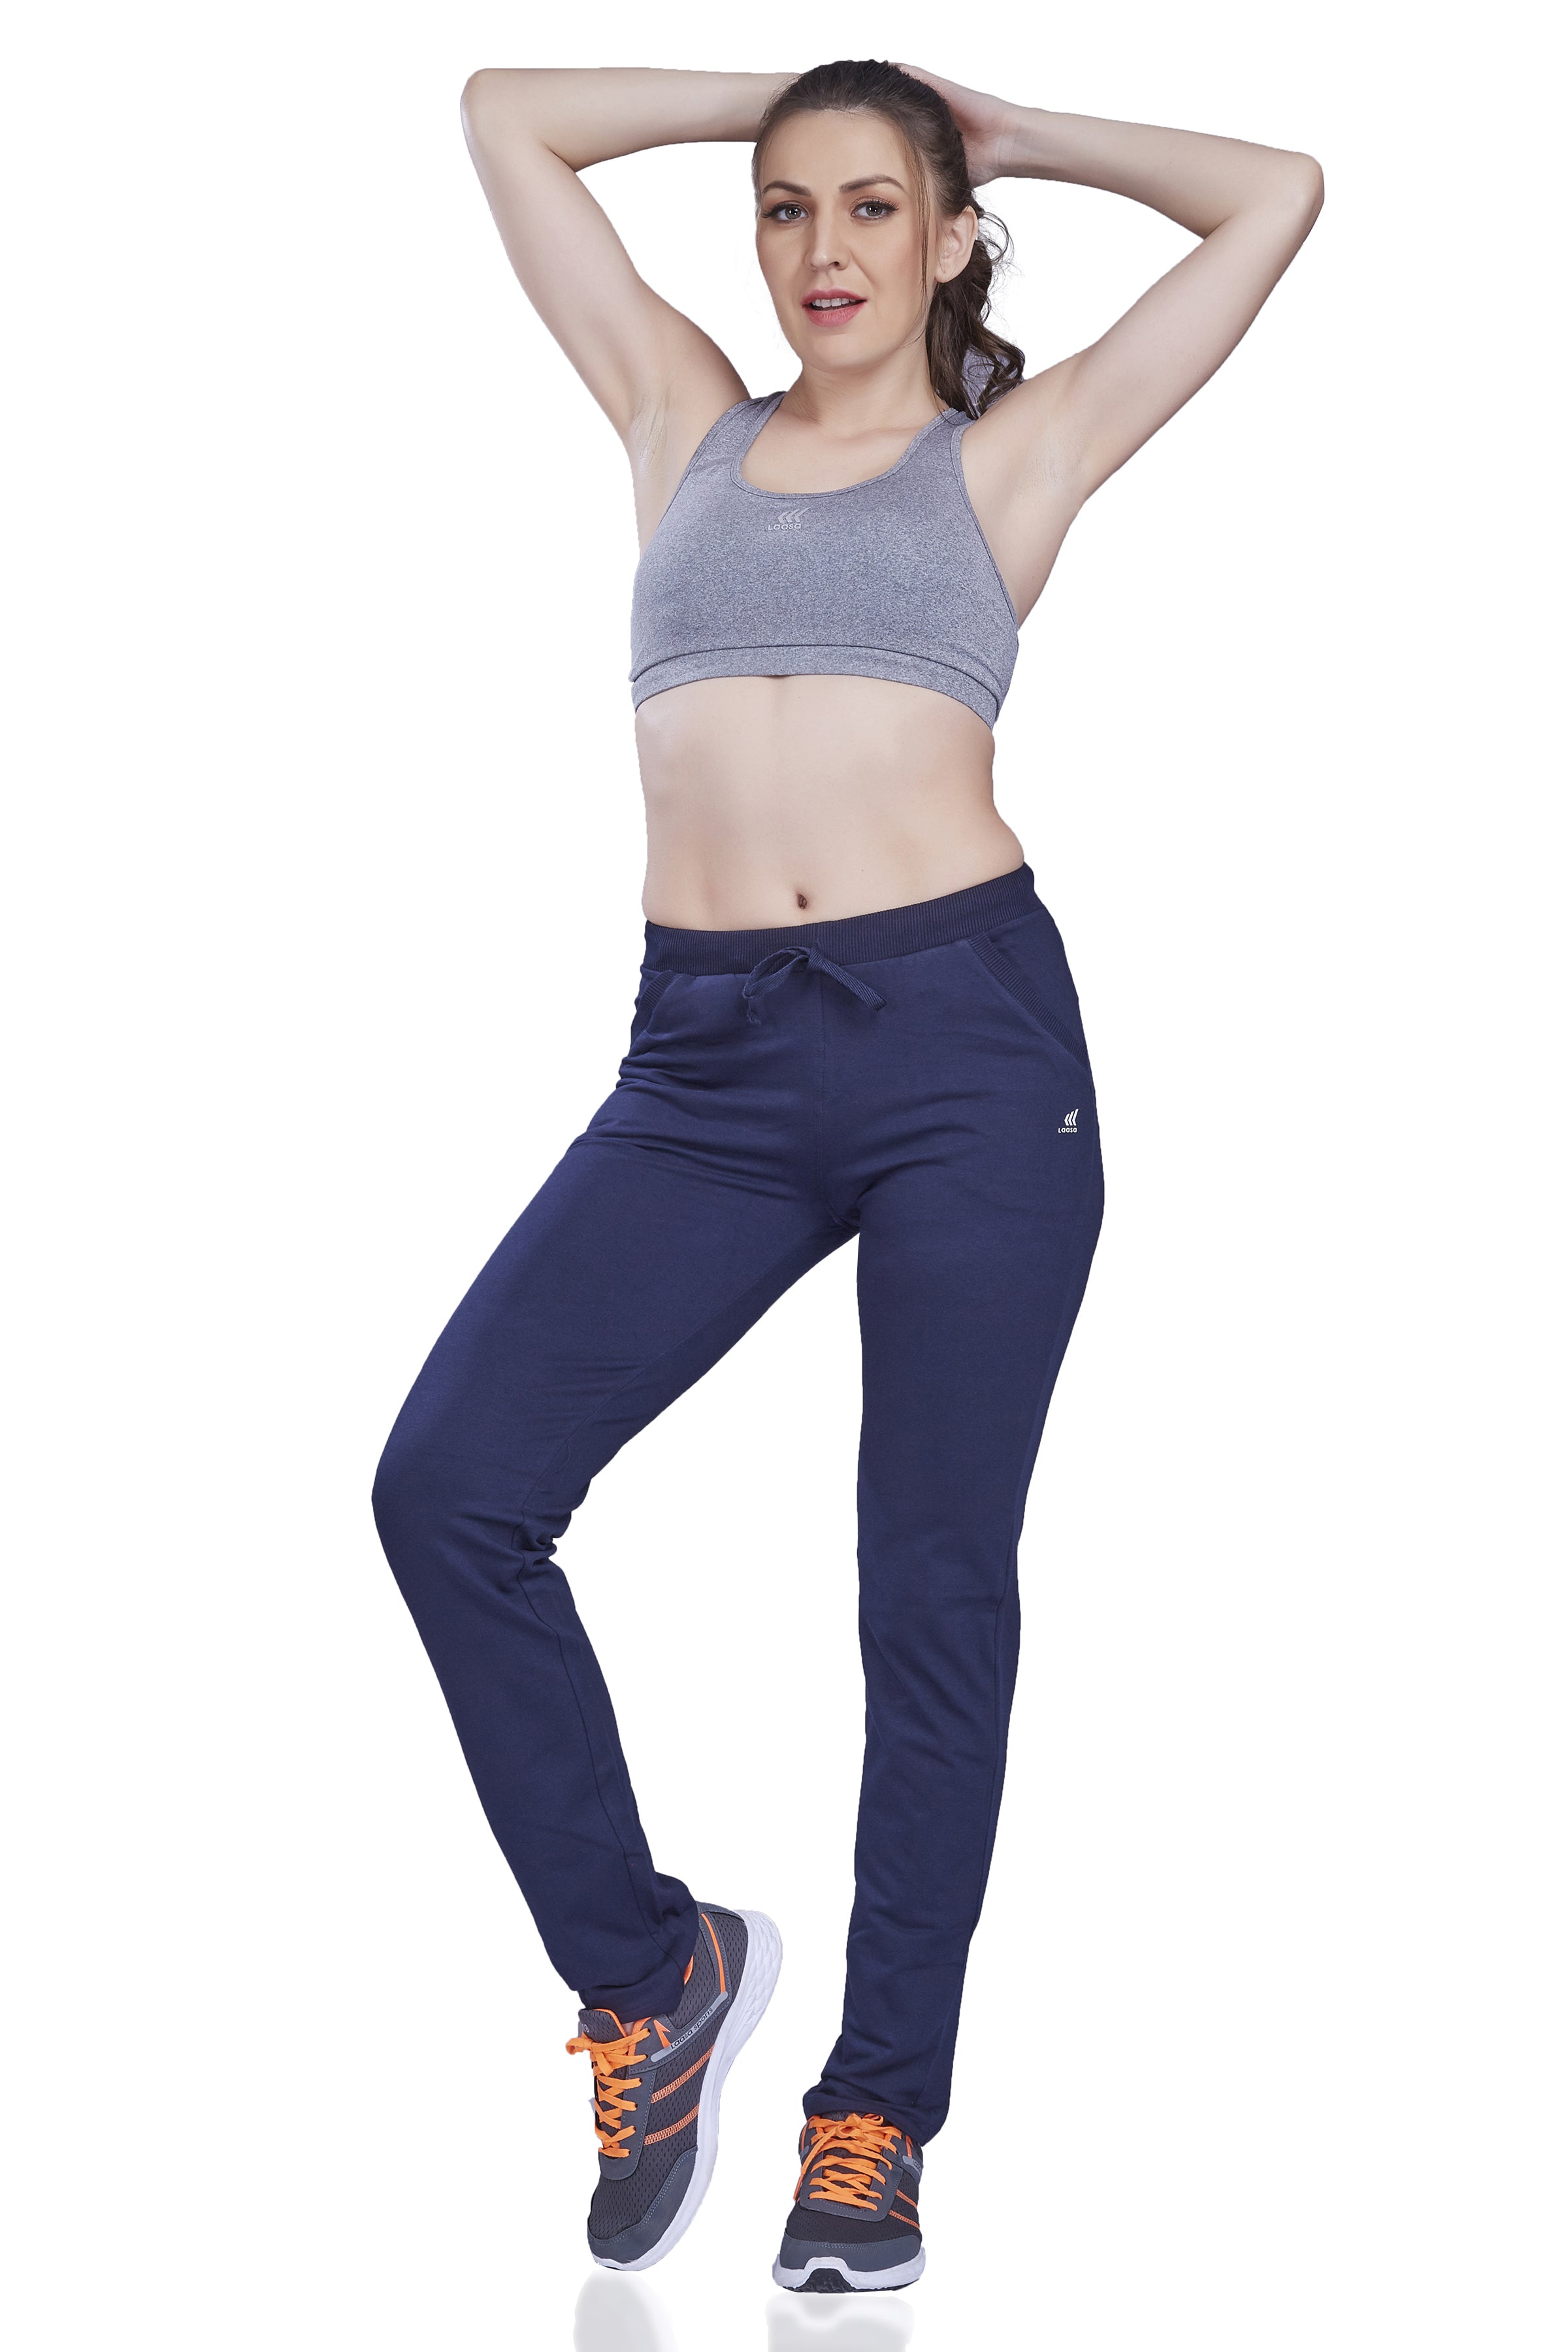 Track Pants for Women | DRI-Fit Track Pant- Buy Online at Laasasports ...